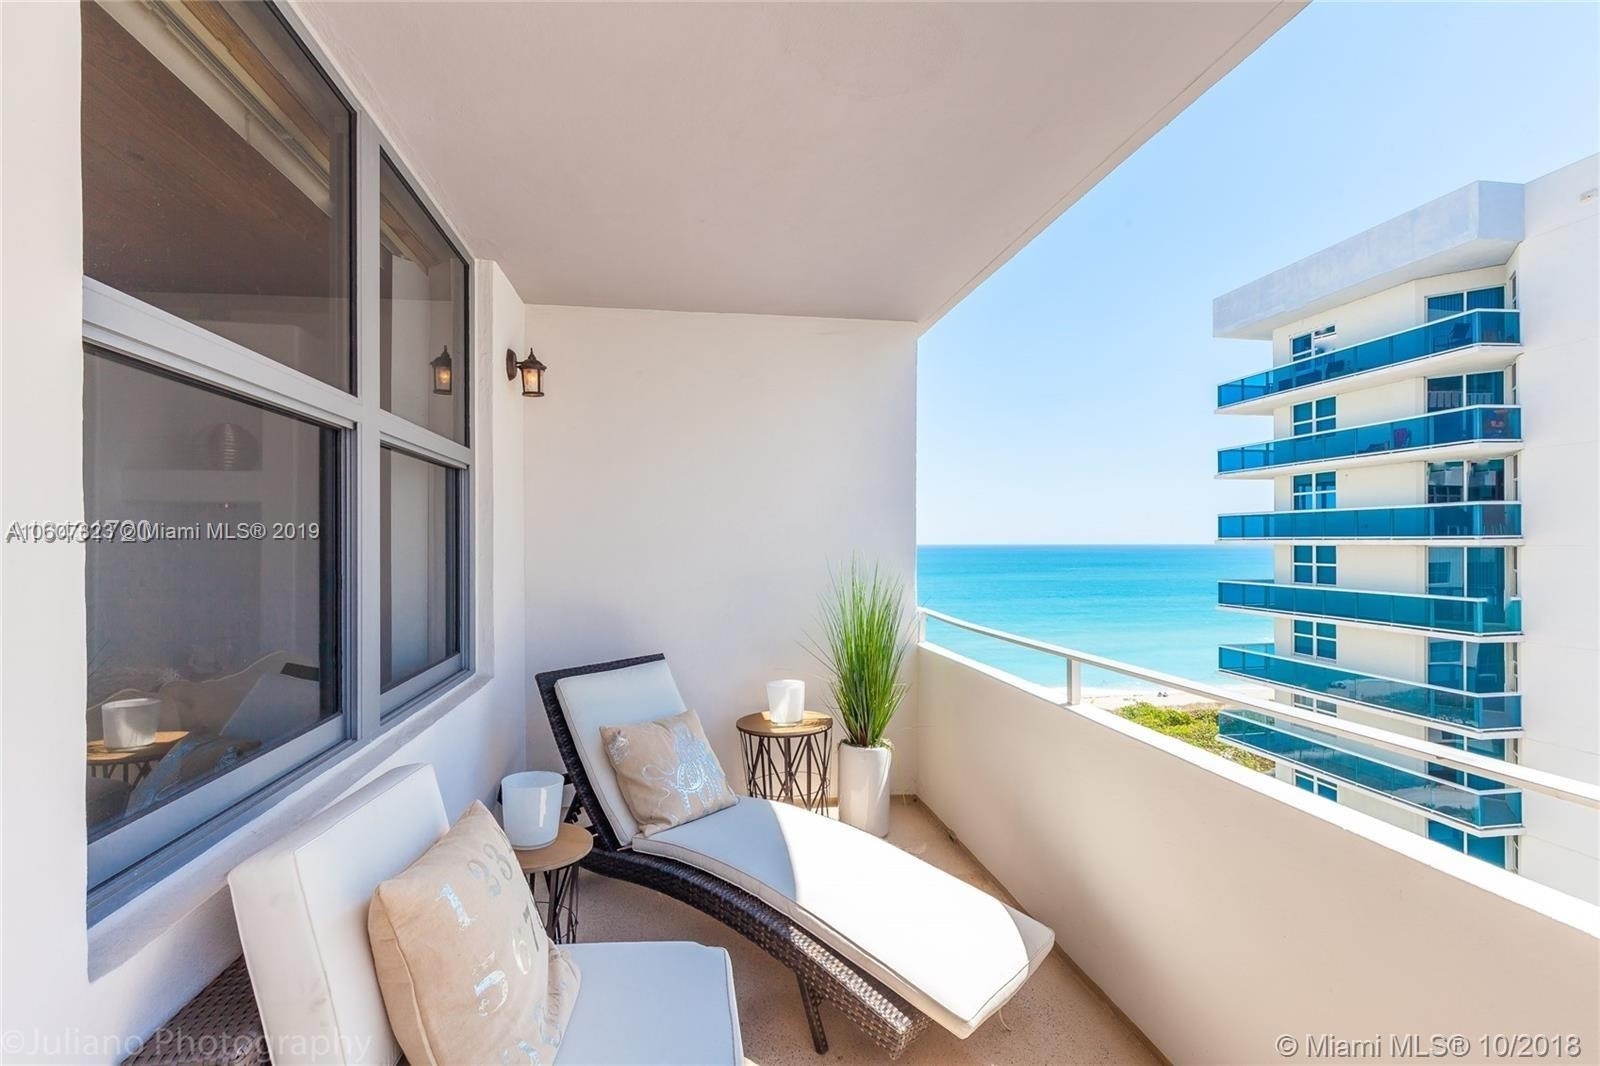 12. Condominiums at 9225 Collins Ave, 1006 Surfside